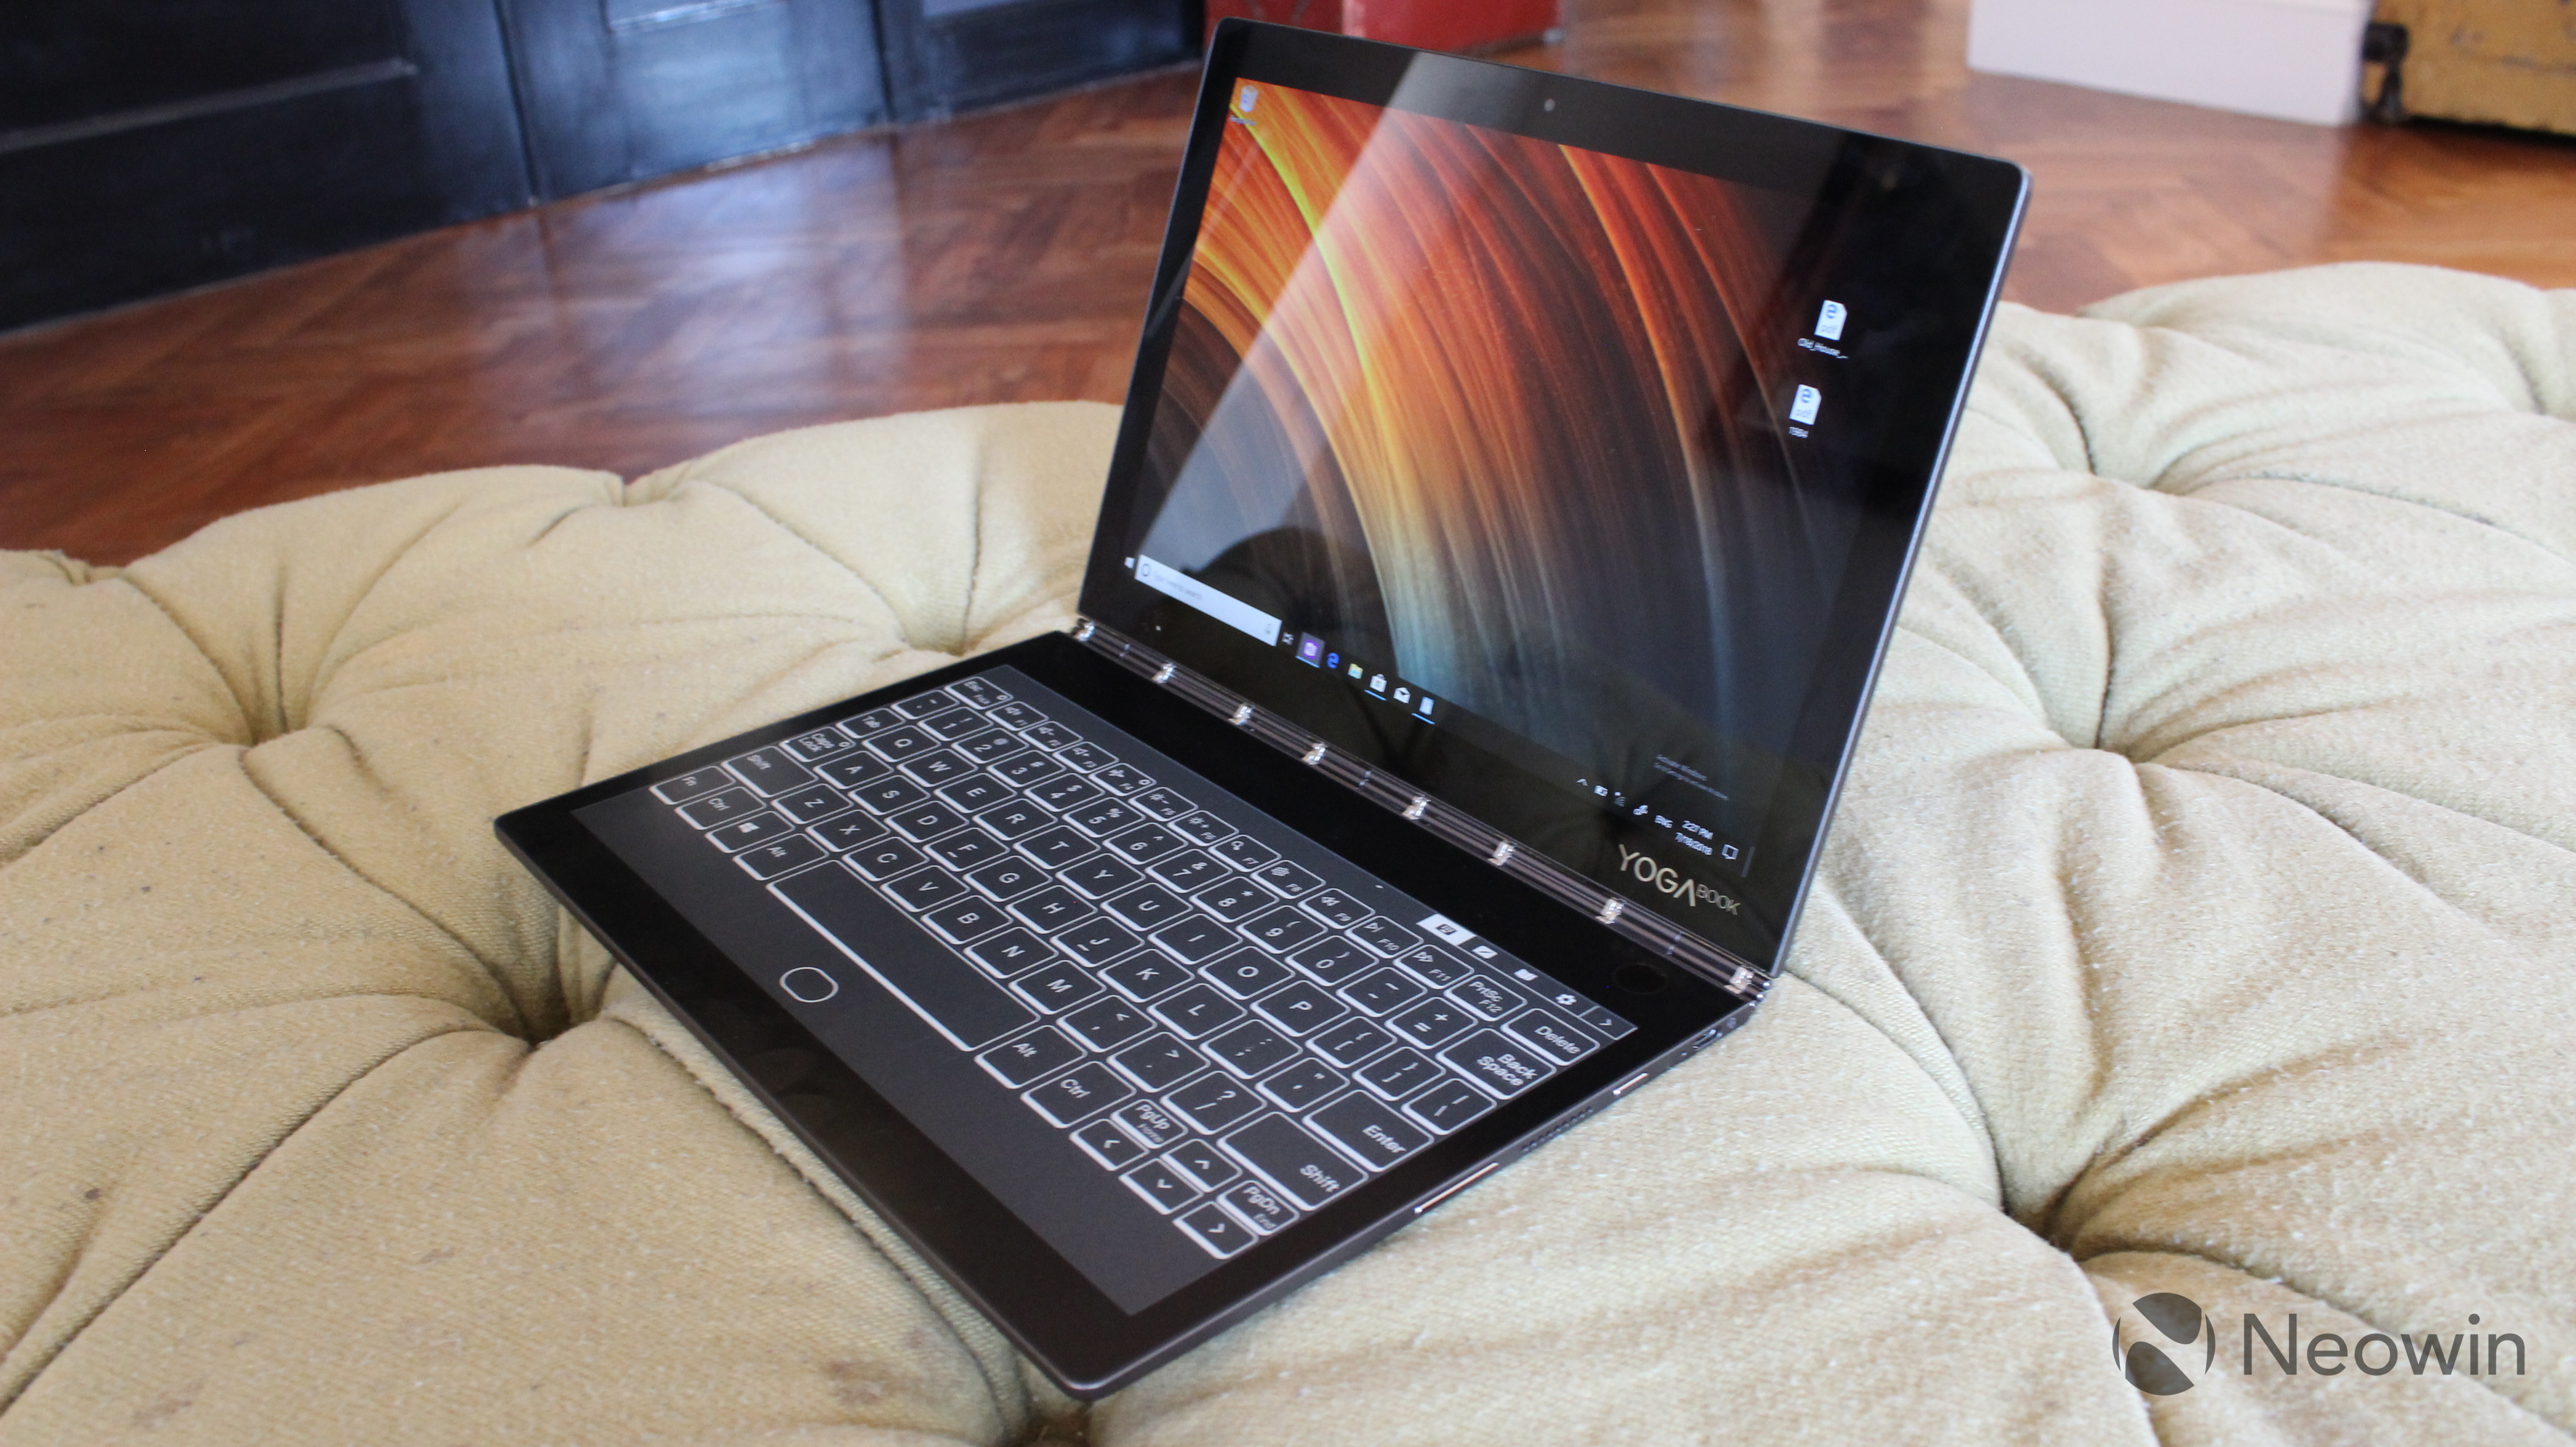 Lenovo's new Yoga Book C930 is Windows 10 only and has an E Ink